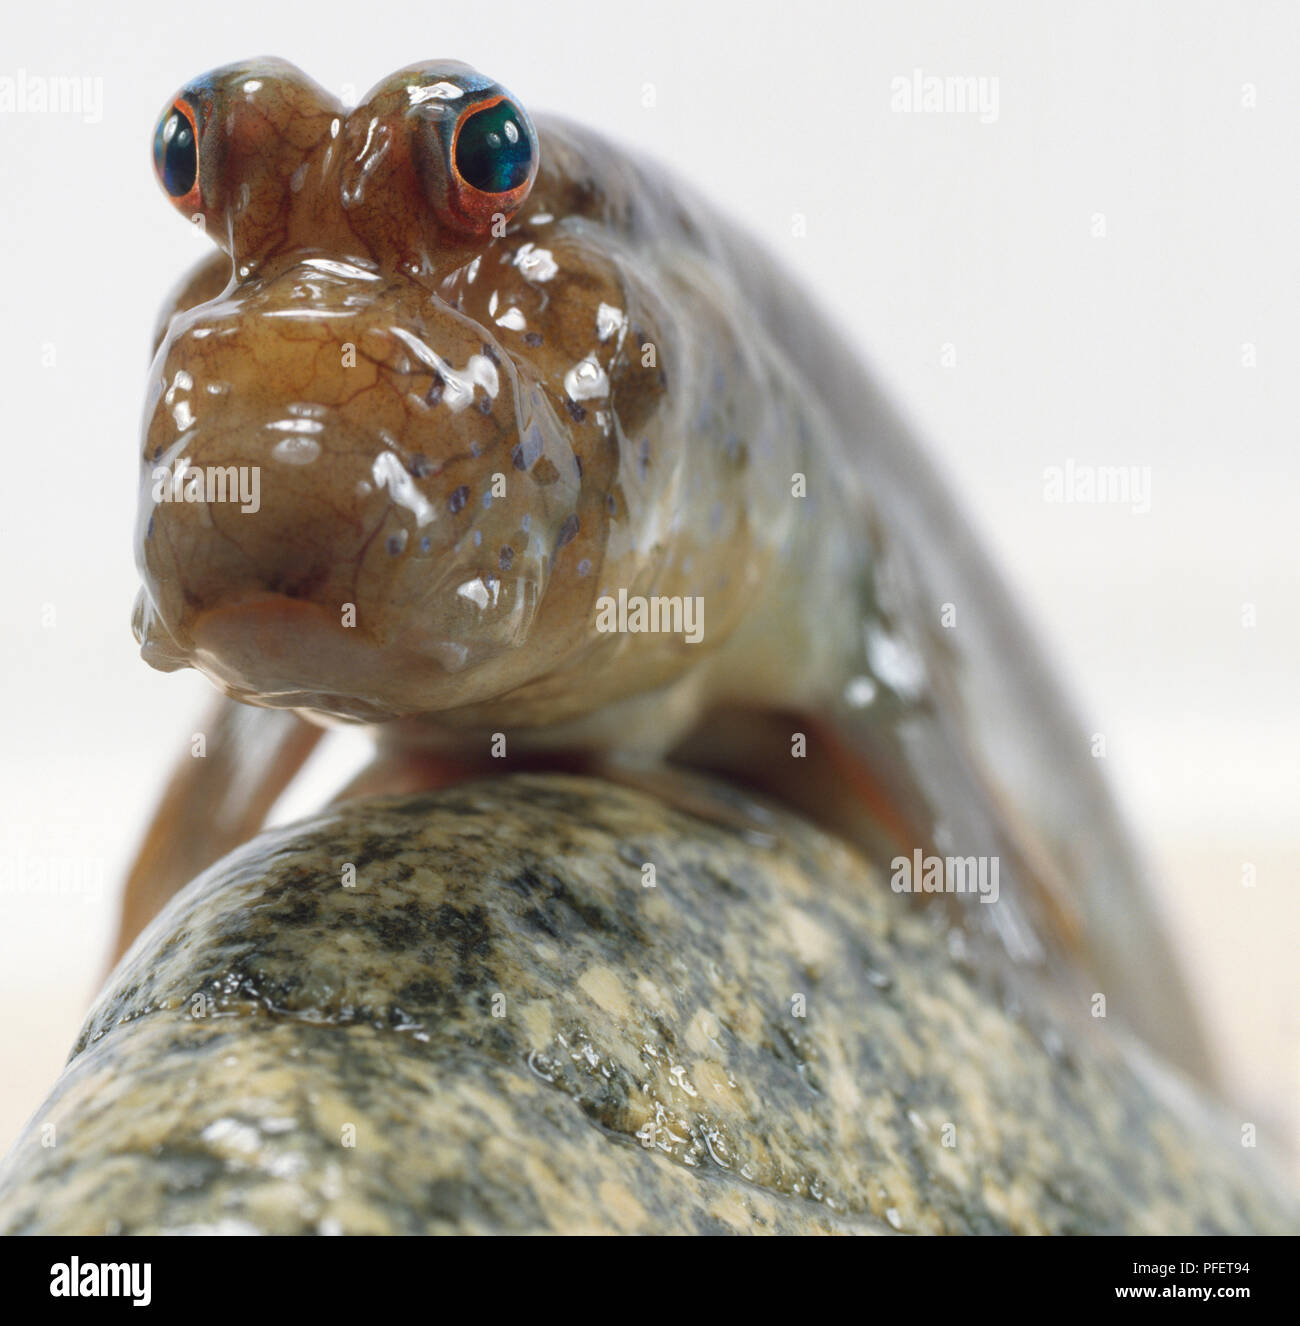 Mudskipper, two large eyes, strangely shaped mouth for catching small creatures, sucker-like pelvic fins for clinging on slippery surfaces, nares for breathing, front view of face. Stock Photo